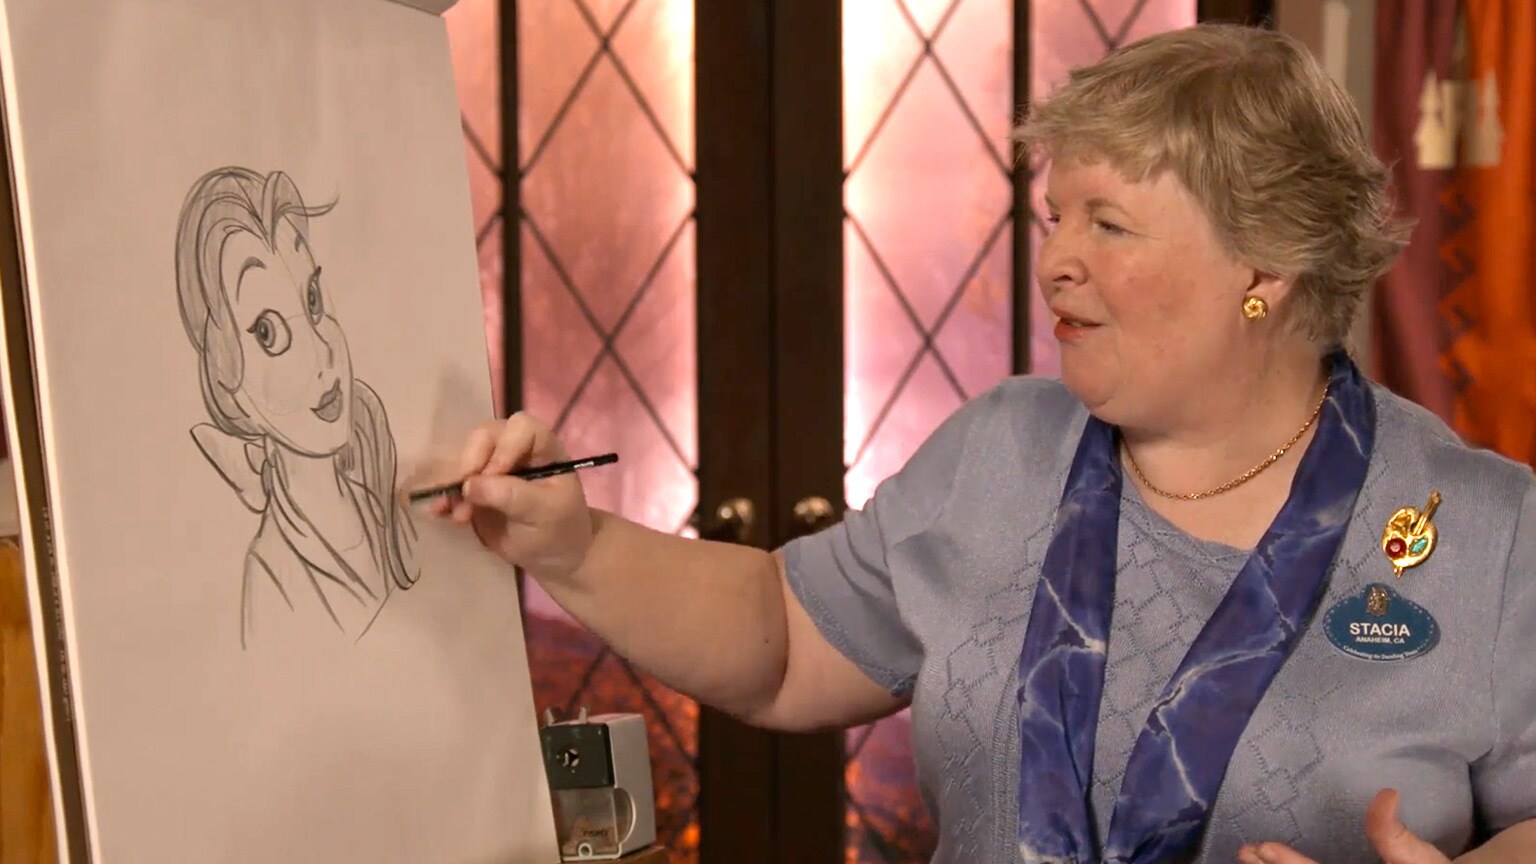 Disney artist and historian Stacia Martin stands in front of an easel and draws Belle from Beauty and the Beast